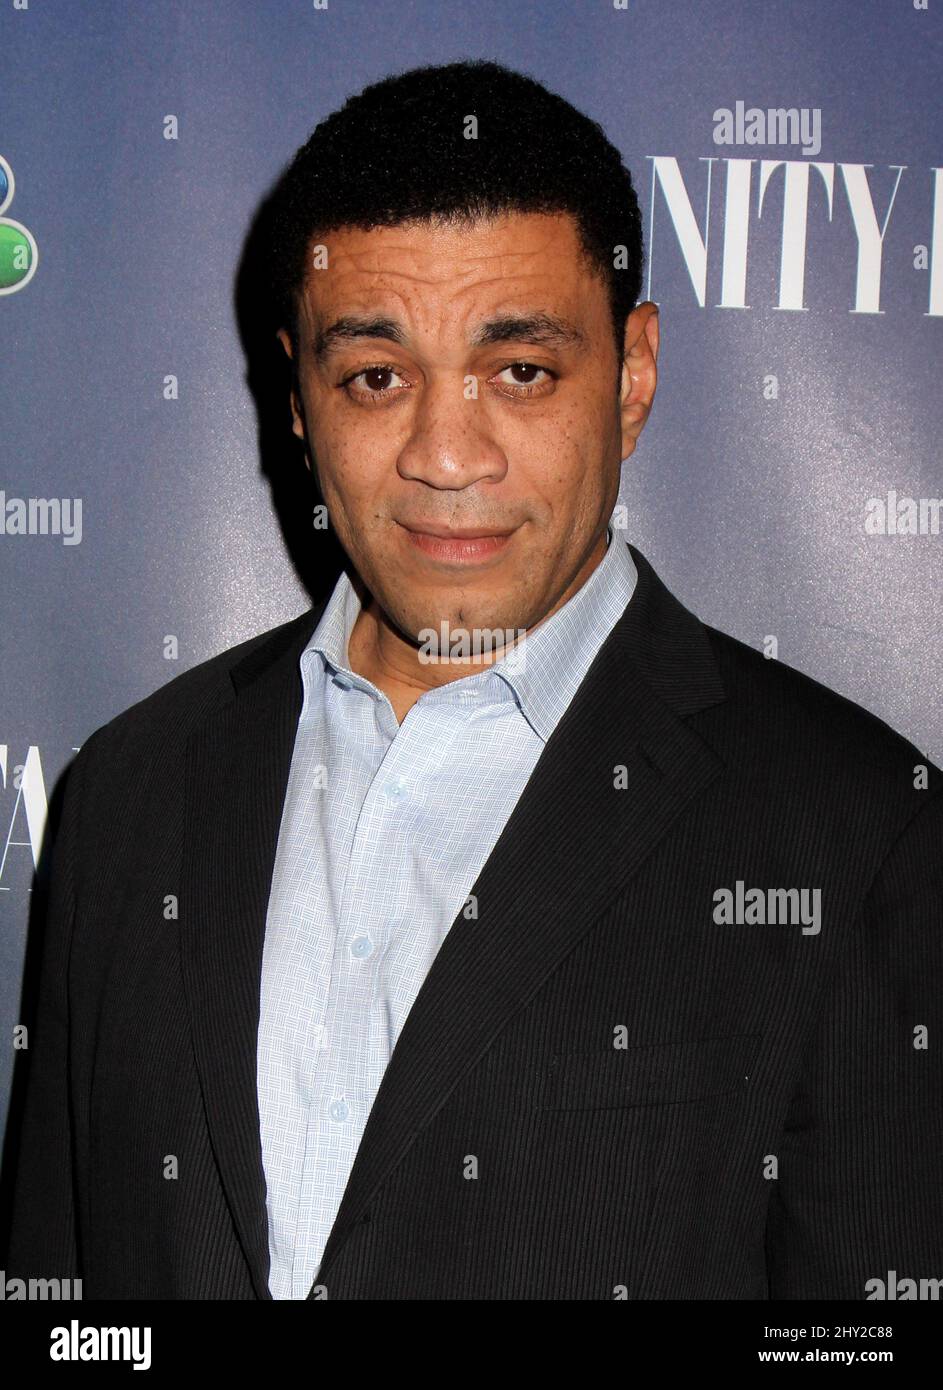 Harry Lennix attending the NBC and Vanity Fair 2013 launch Party in New York. Stock Photo